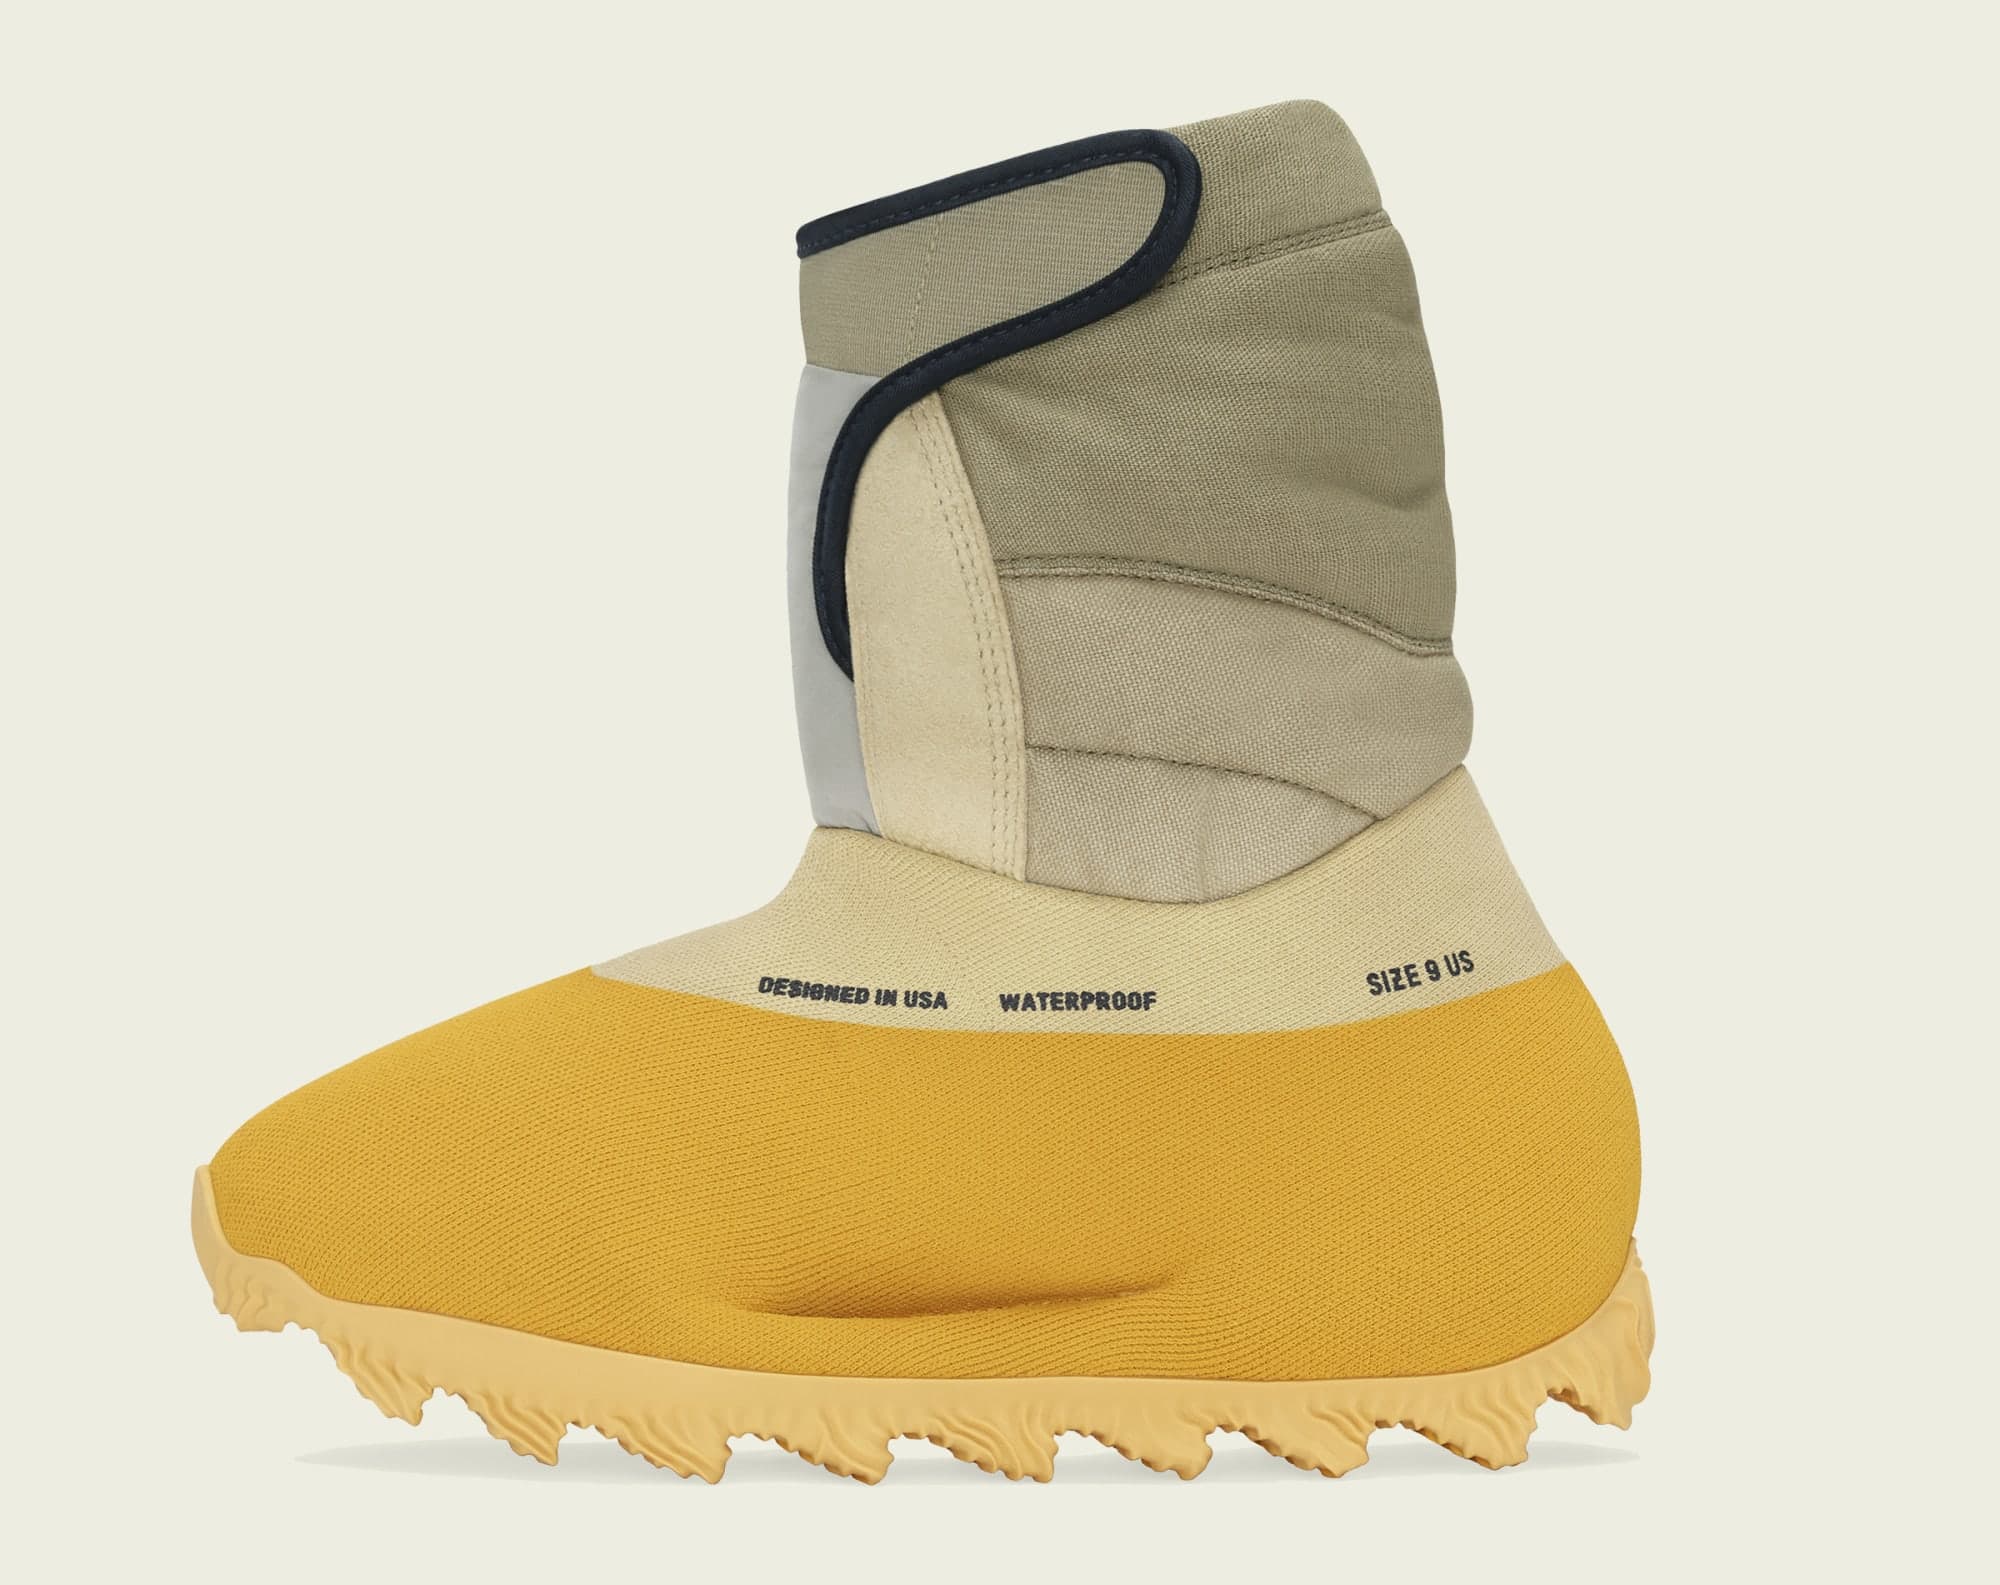 Adidas Yeezy Knit Runner Boot 'Sulfur' Release Date GY1824 | Sole Collector